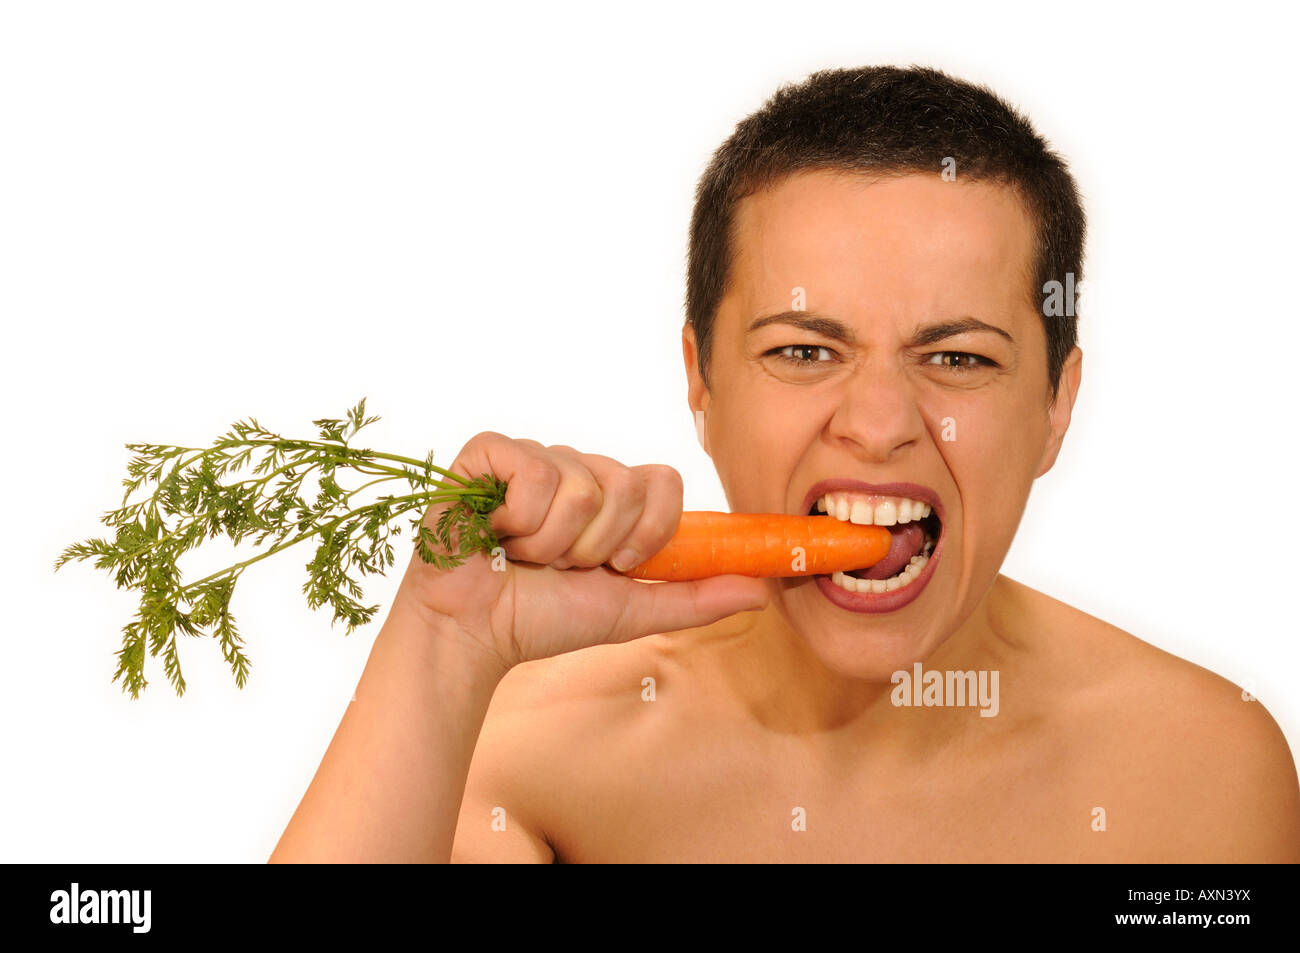 Studio portrait of woman eating a carrot Stock Photo